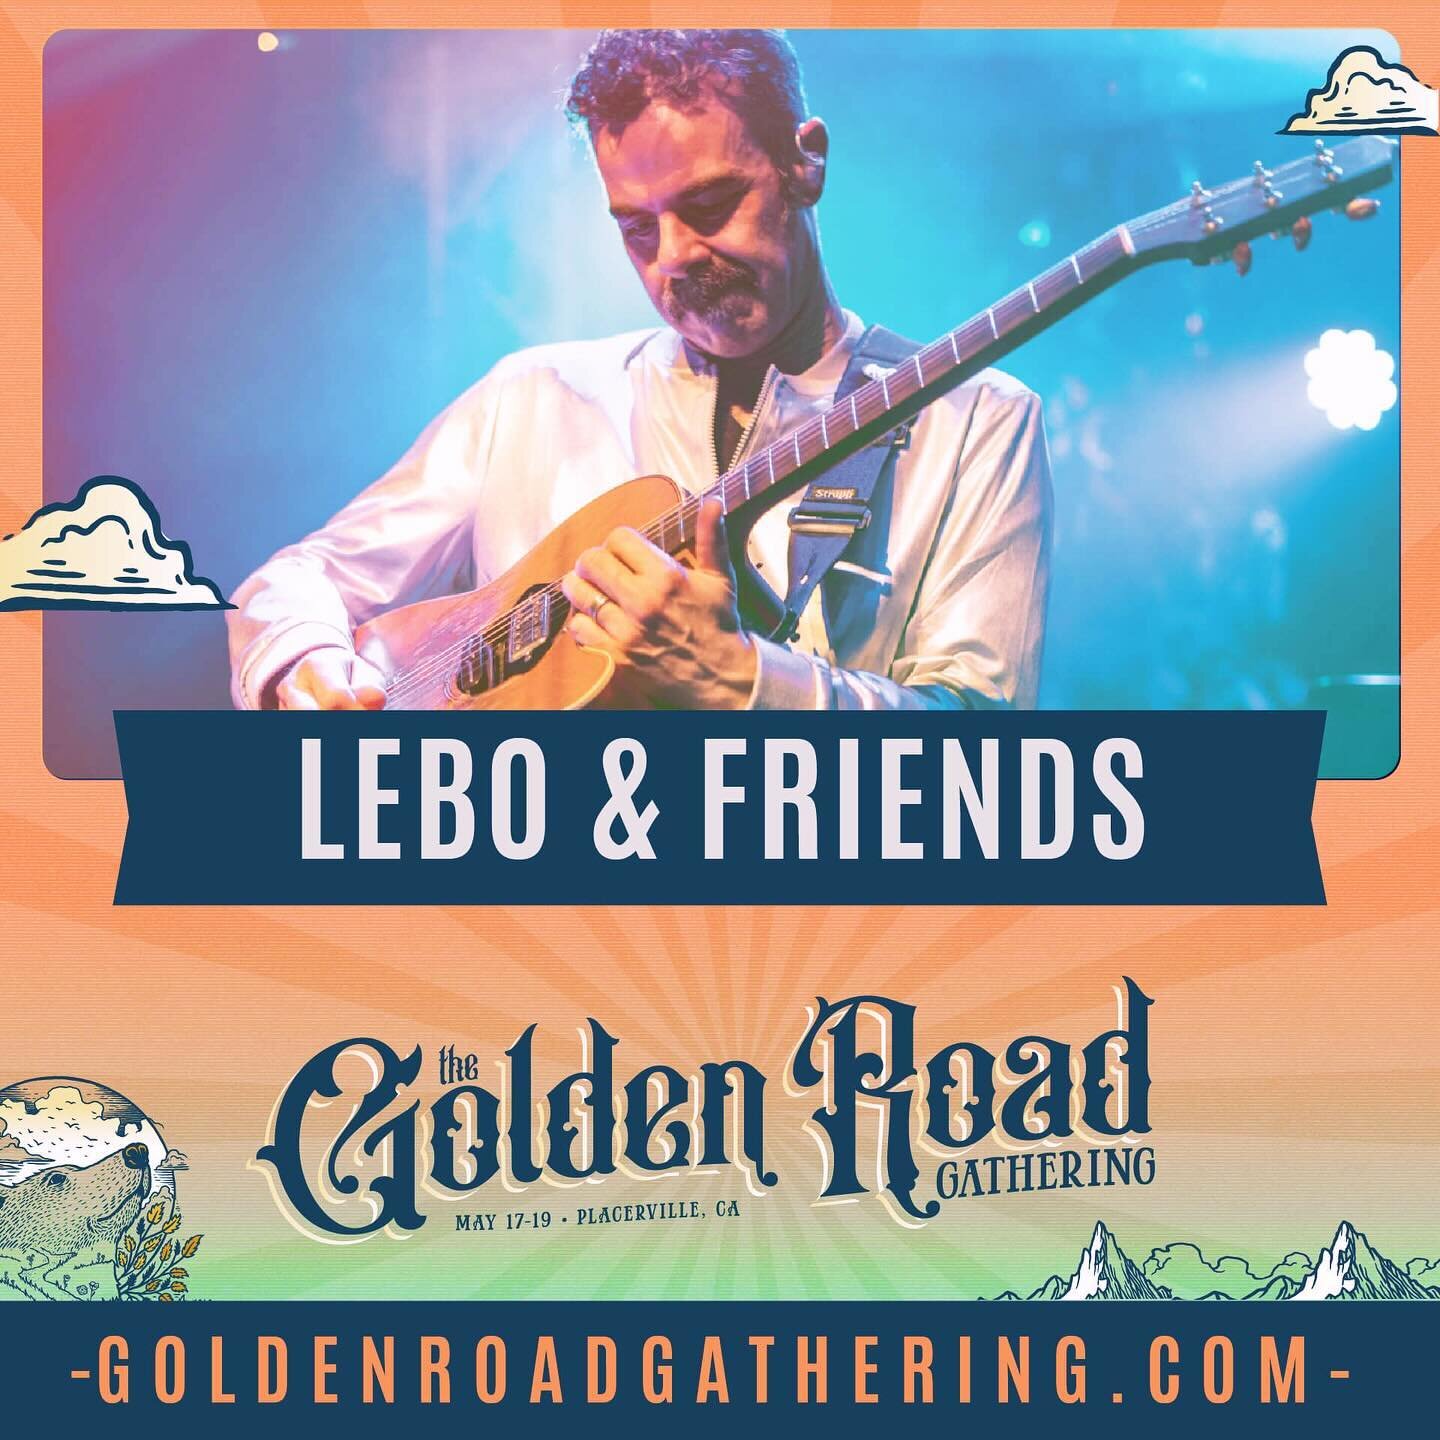 Super excited that Lebo &amp; Friends has joined the lineup @goldenroadgathering May 17-19 in Placerville, CA!  Psyched!🔥🔥🔥